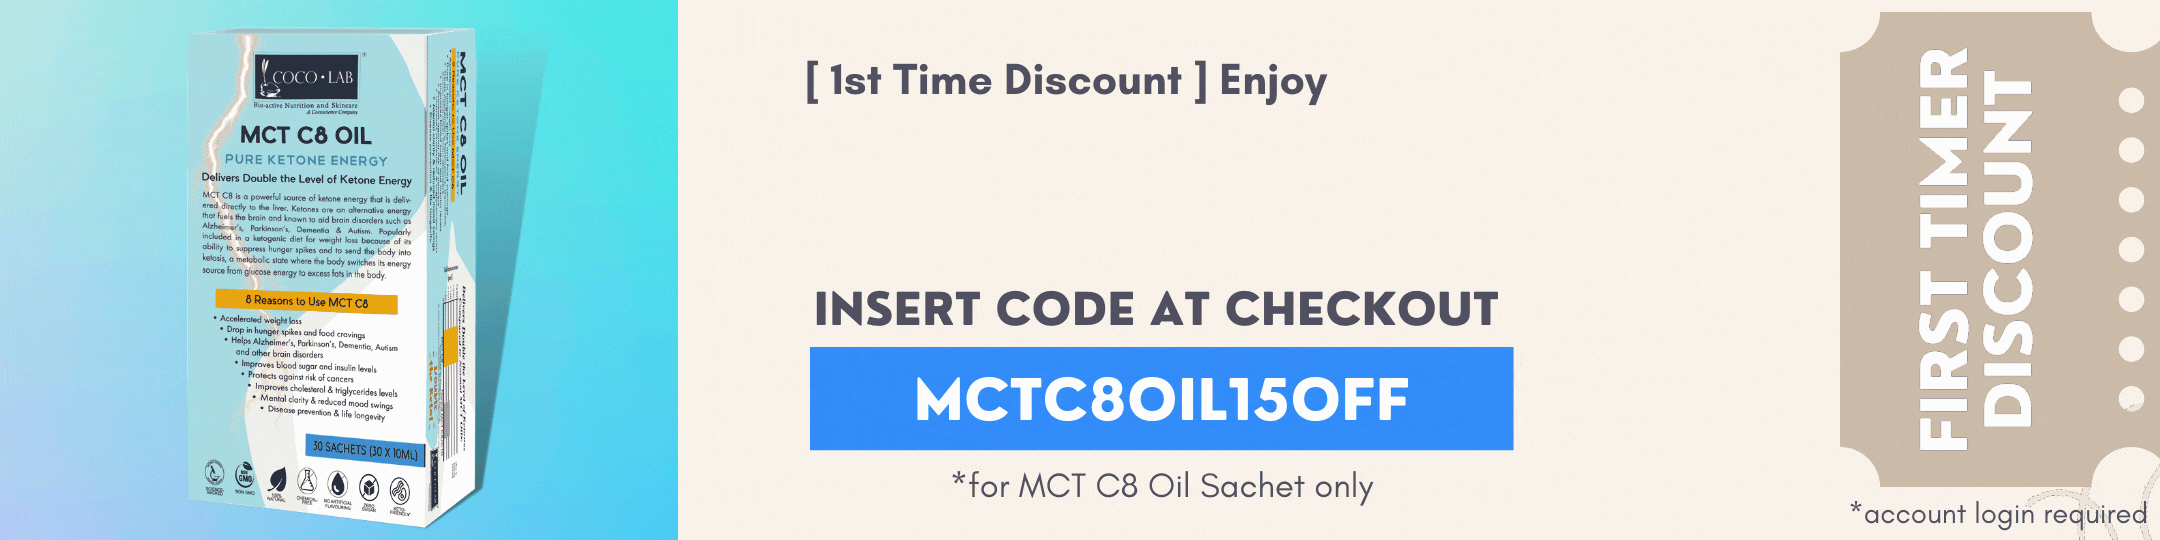 Get RM15 OFF with code MCTC8OIL15OFF at COCOLAB